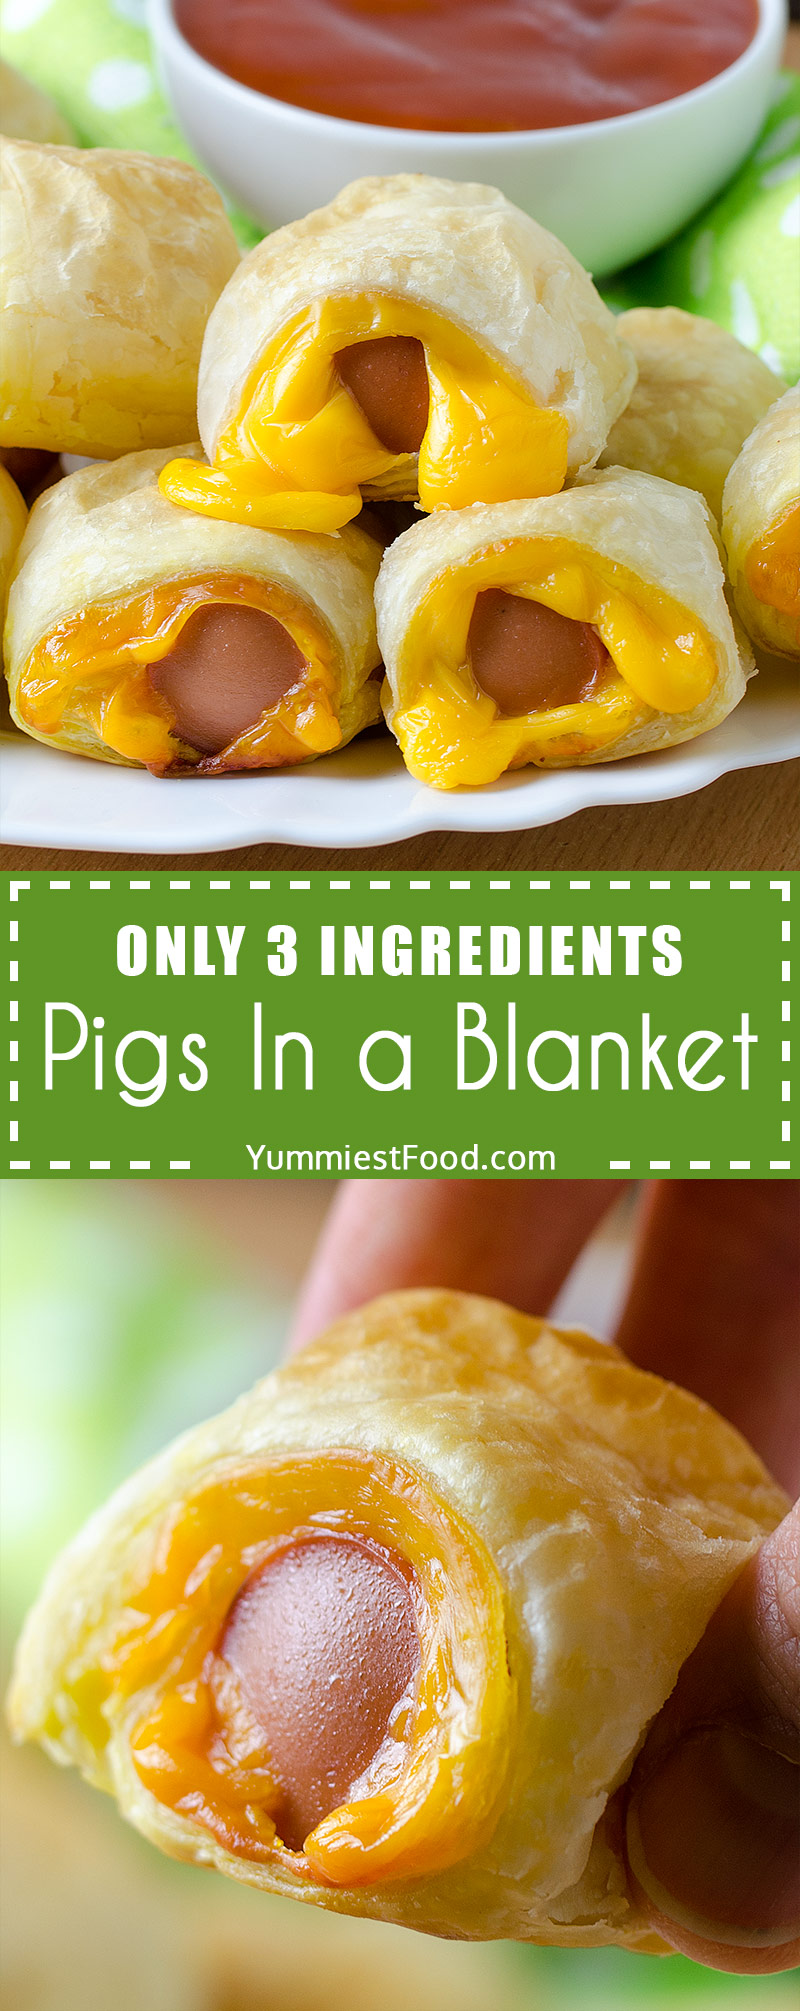 EASY PIGS IN A BLANKET - Just 3 ingredients and only 5 minutes of preparation